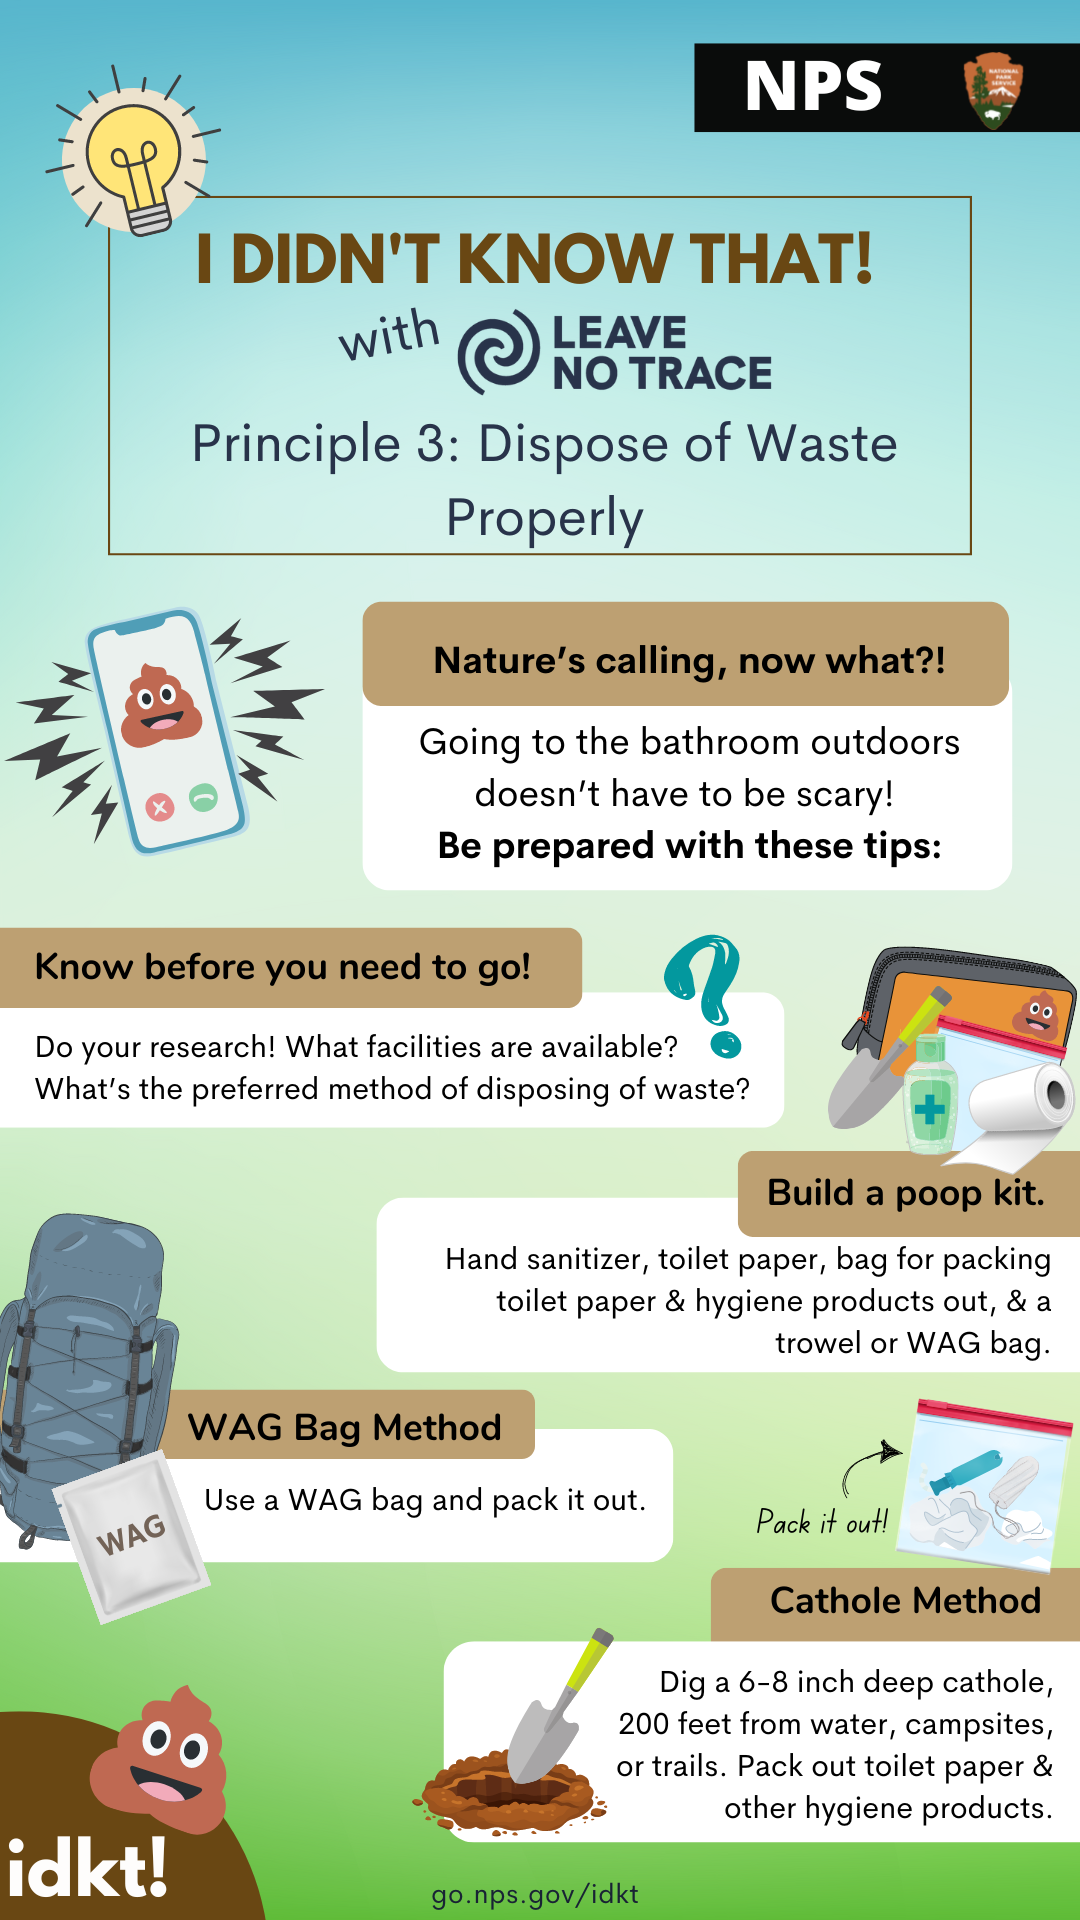 Infographic for I Didn't Know That! (with Leave No Trace) Principle 3: Dispose of Waste Properly with tips on how to go to the bathroom outdoors